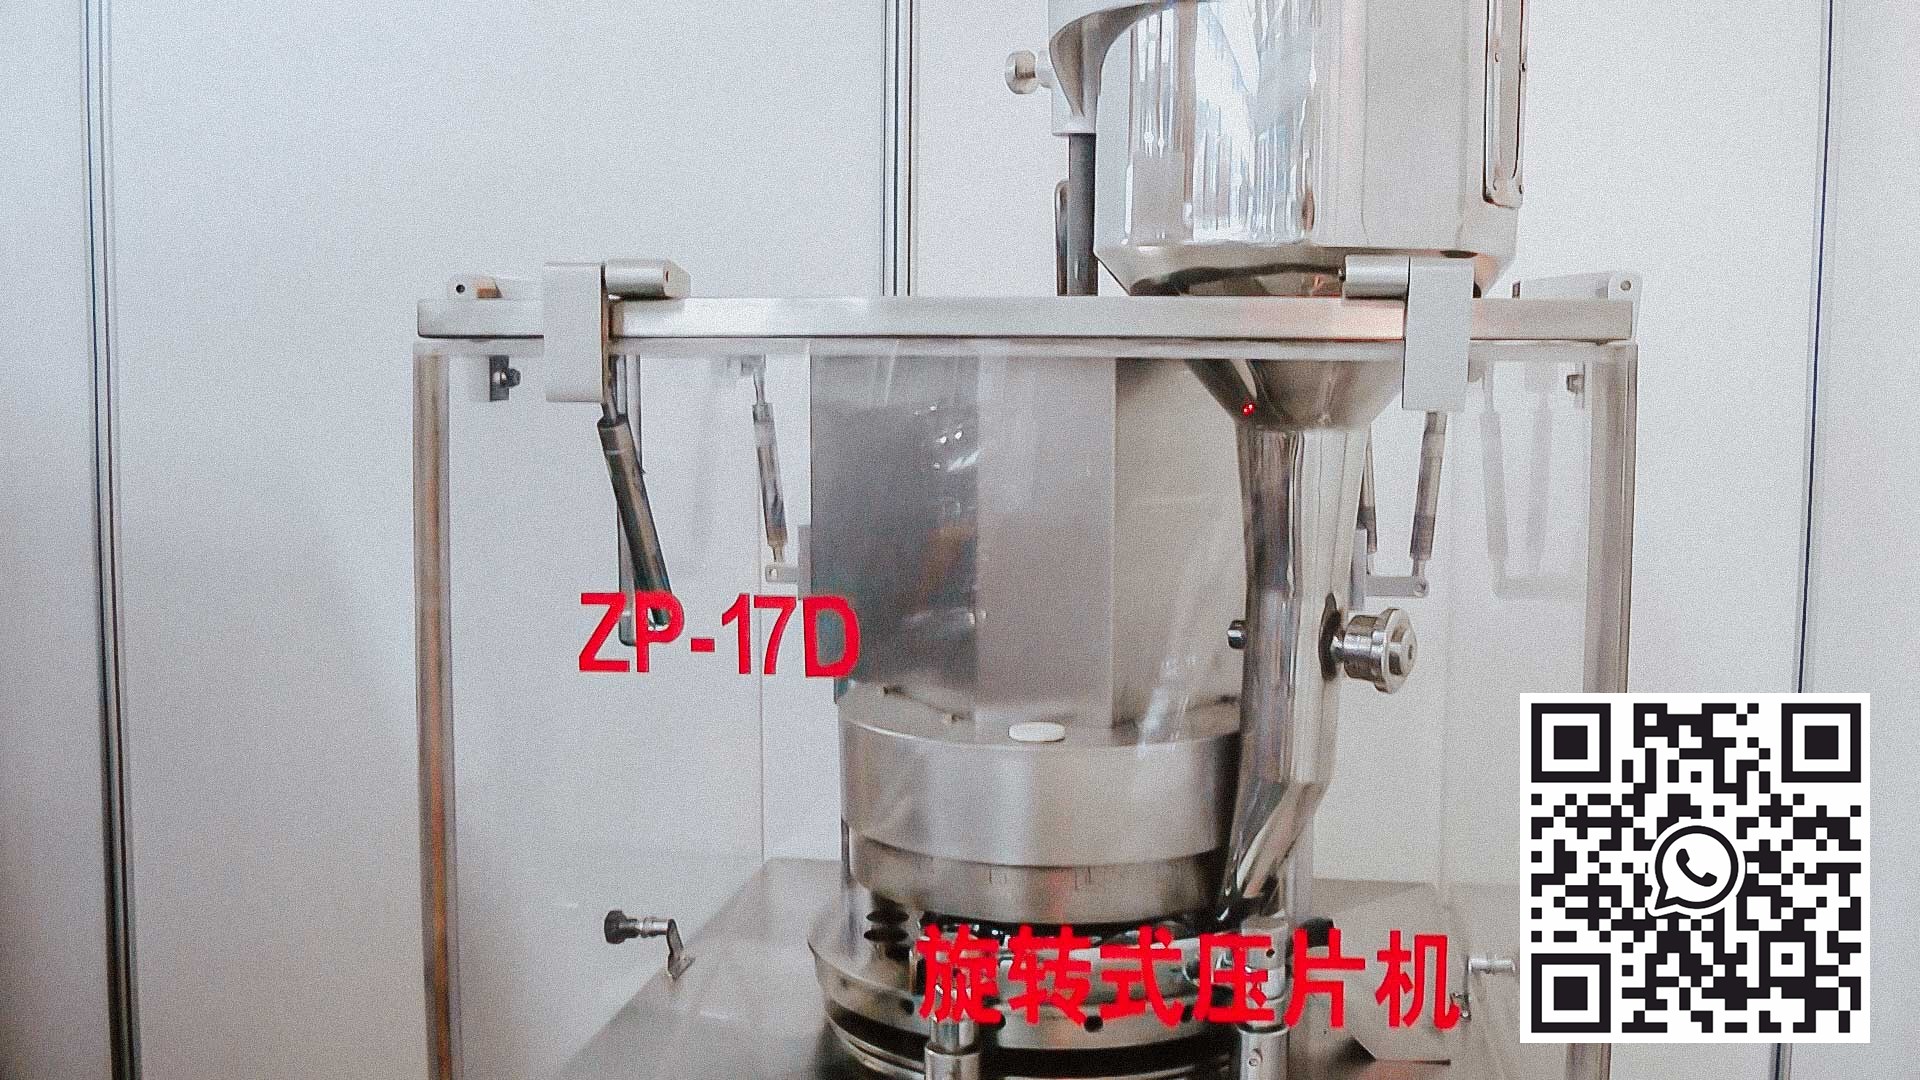 Automatic rotary tablet press for manufacture of tablets from powder in pharmaceutical